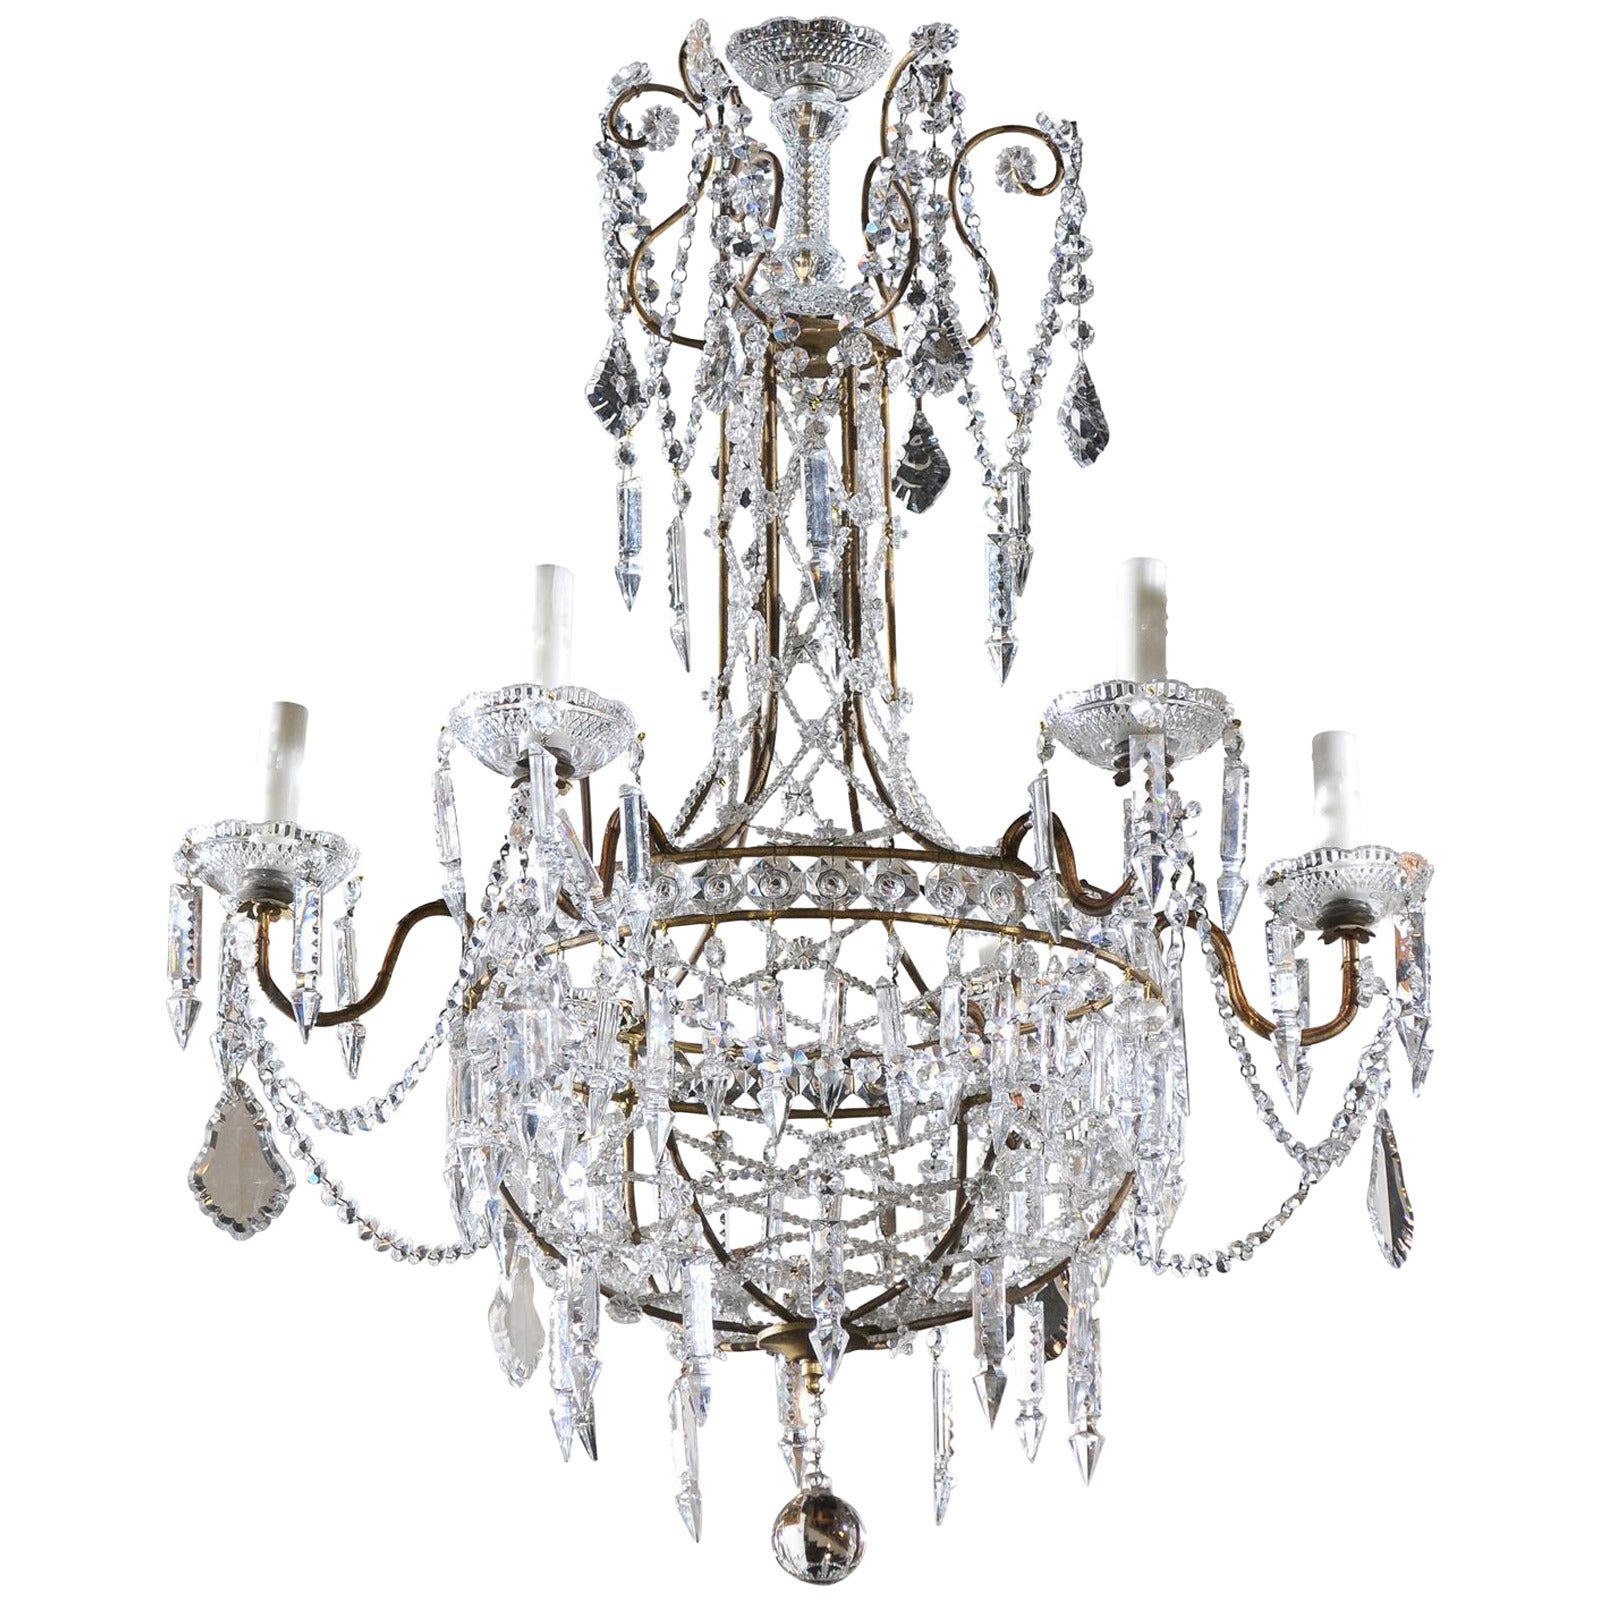 Italian Six-Light Crystal Basket Chandelier from the Early 20th Century